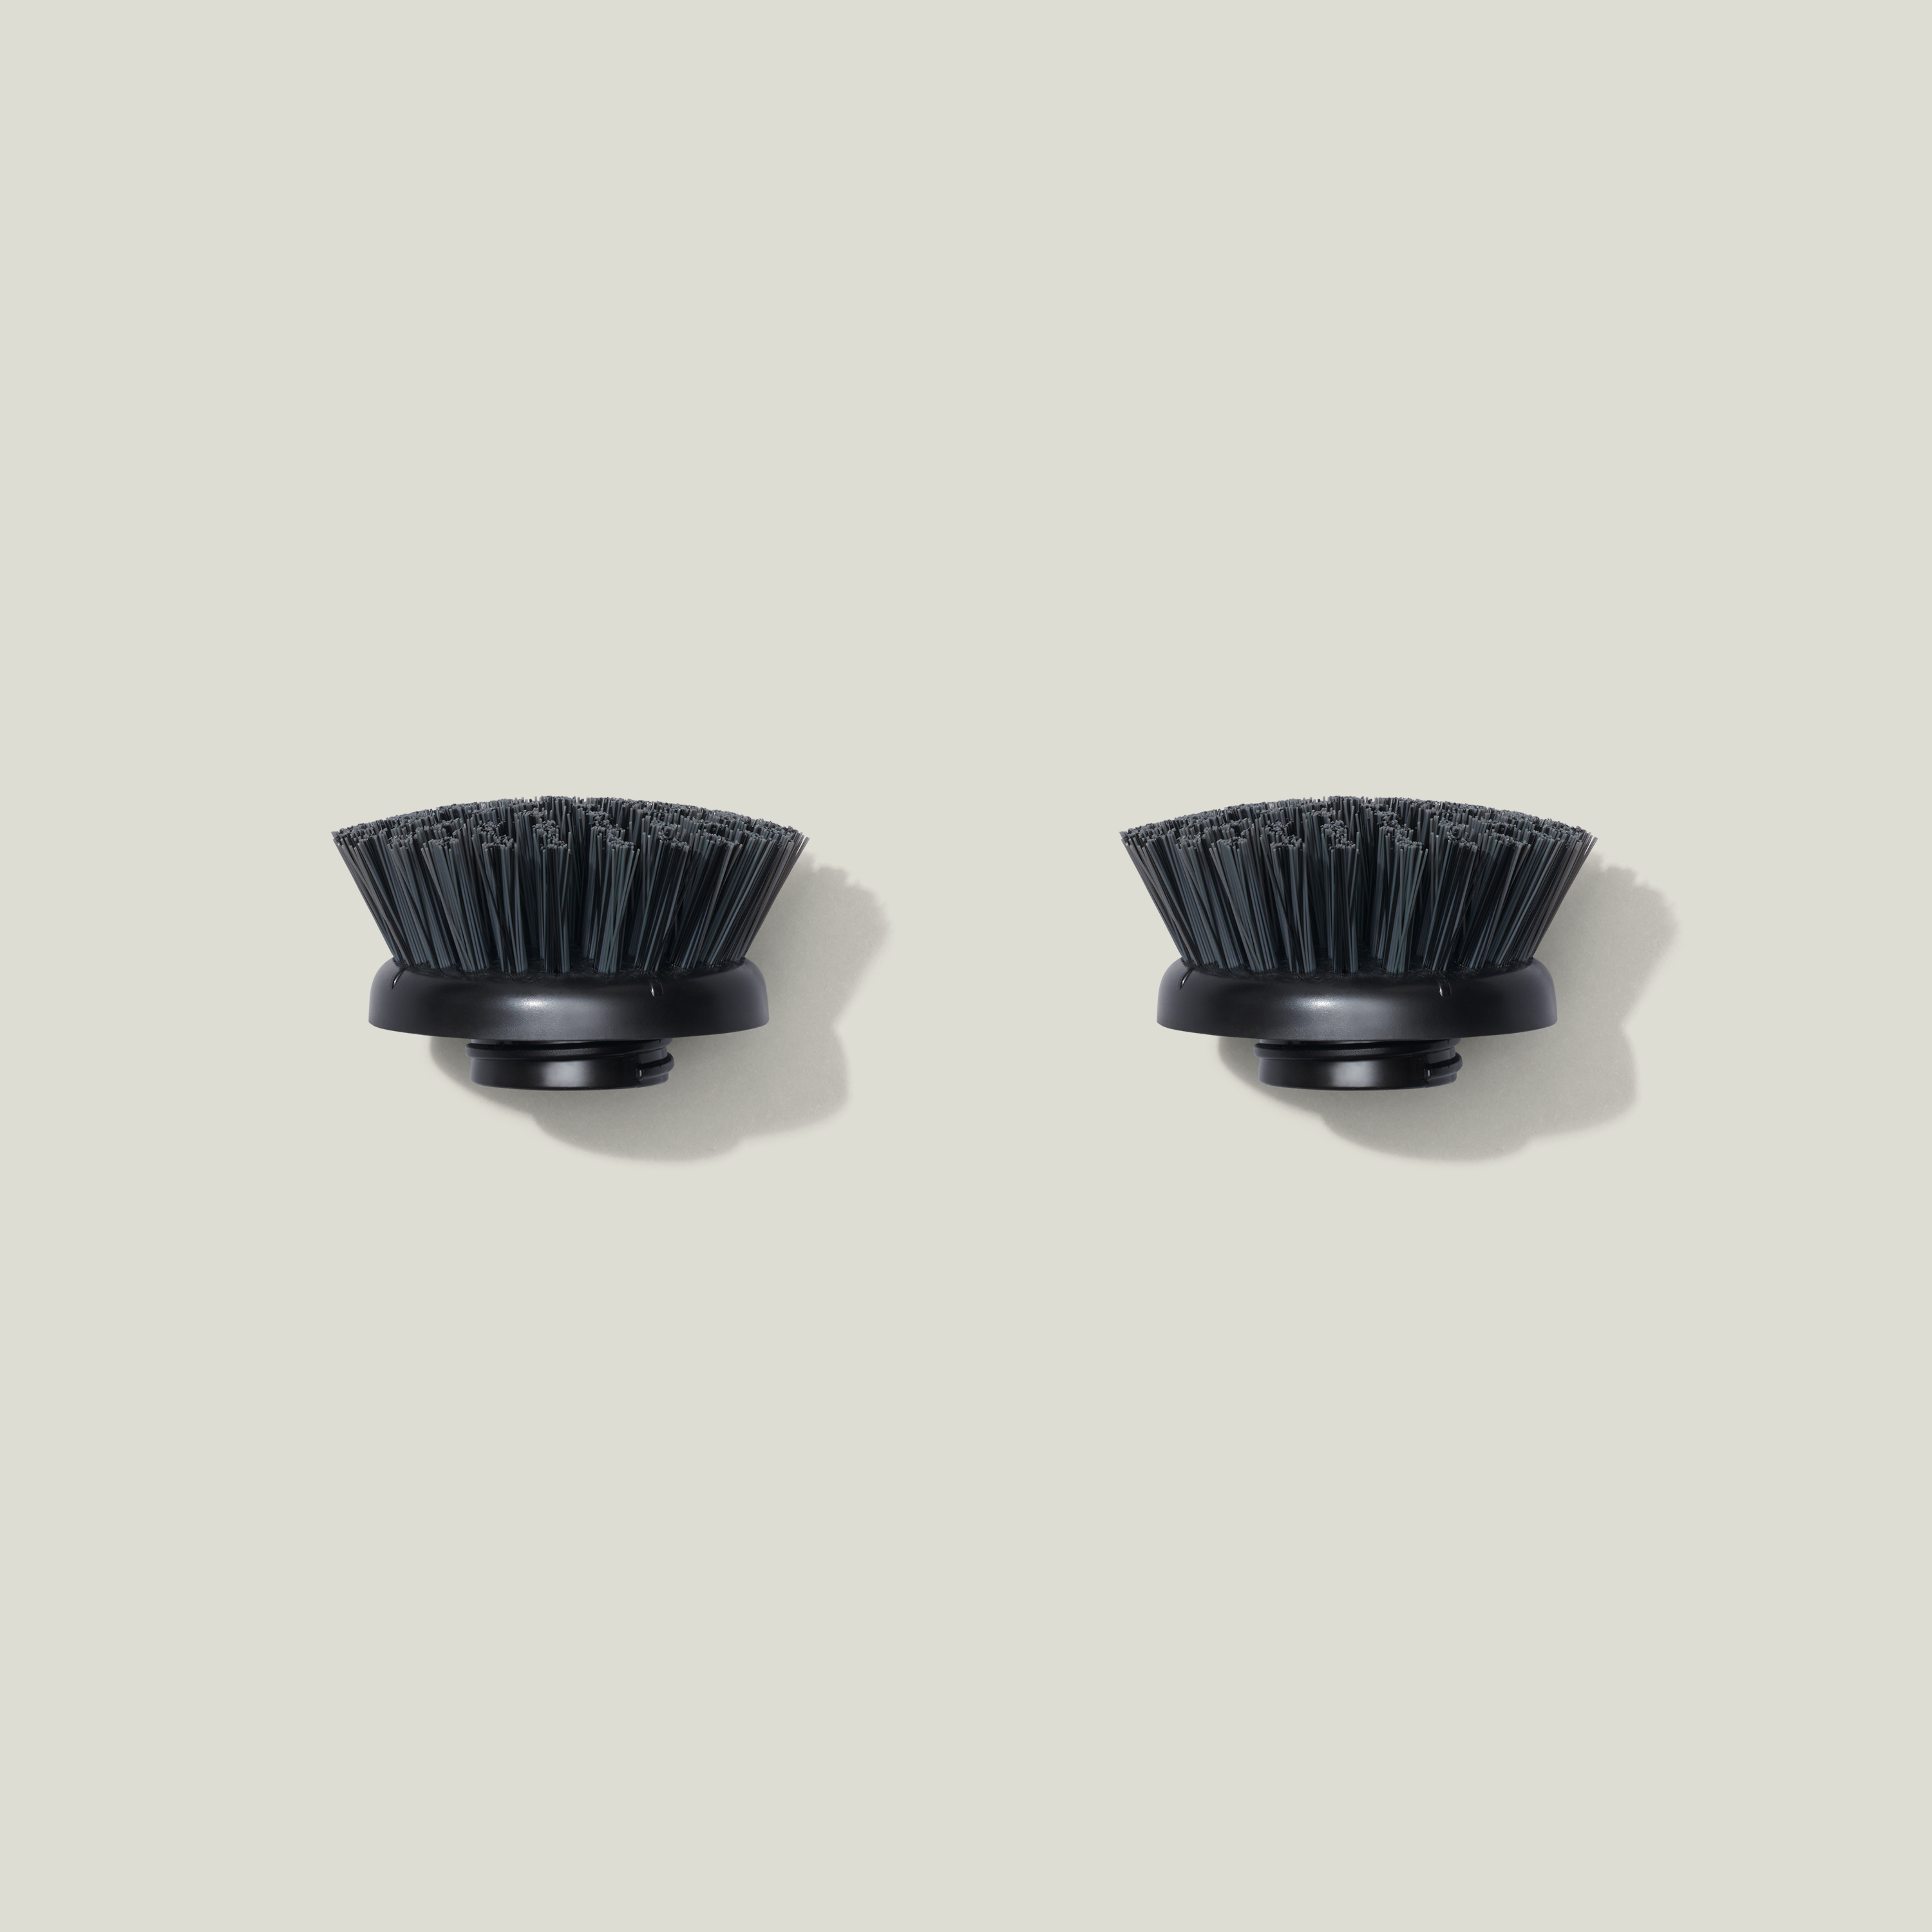 Curio Homegoods 2-pack The Ionic Palm Brush Bristles in Onyx